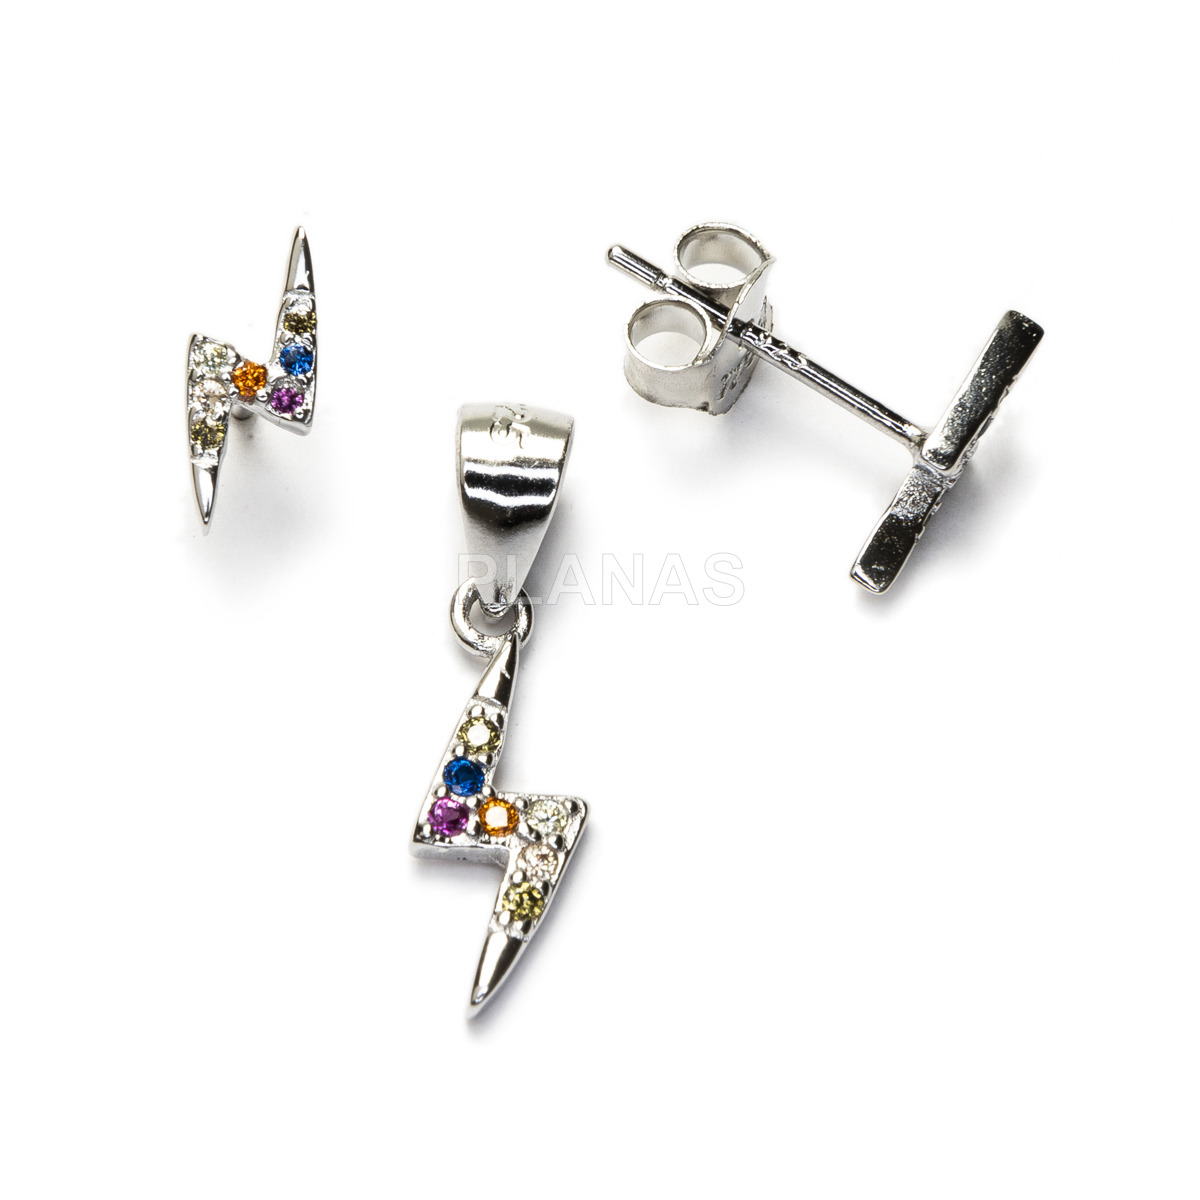 Set in rhodium-plated sterling silver and colored zircons.lightning.